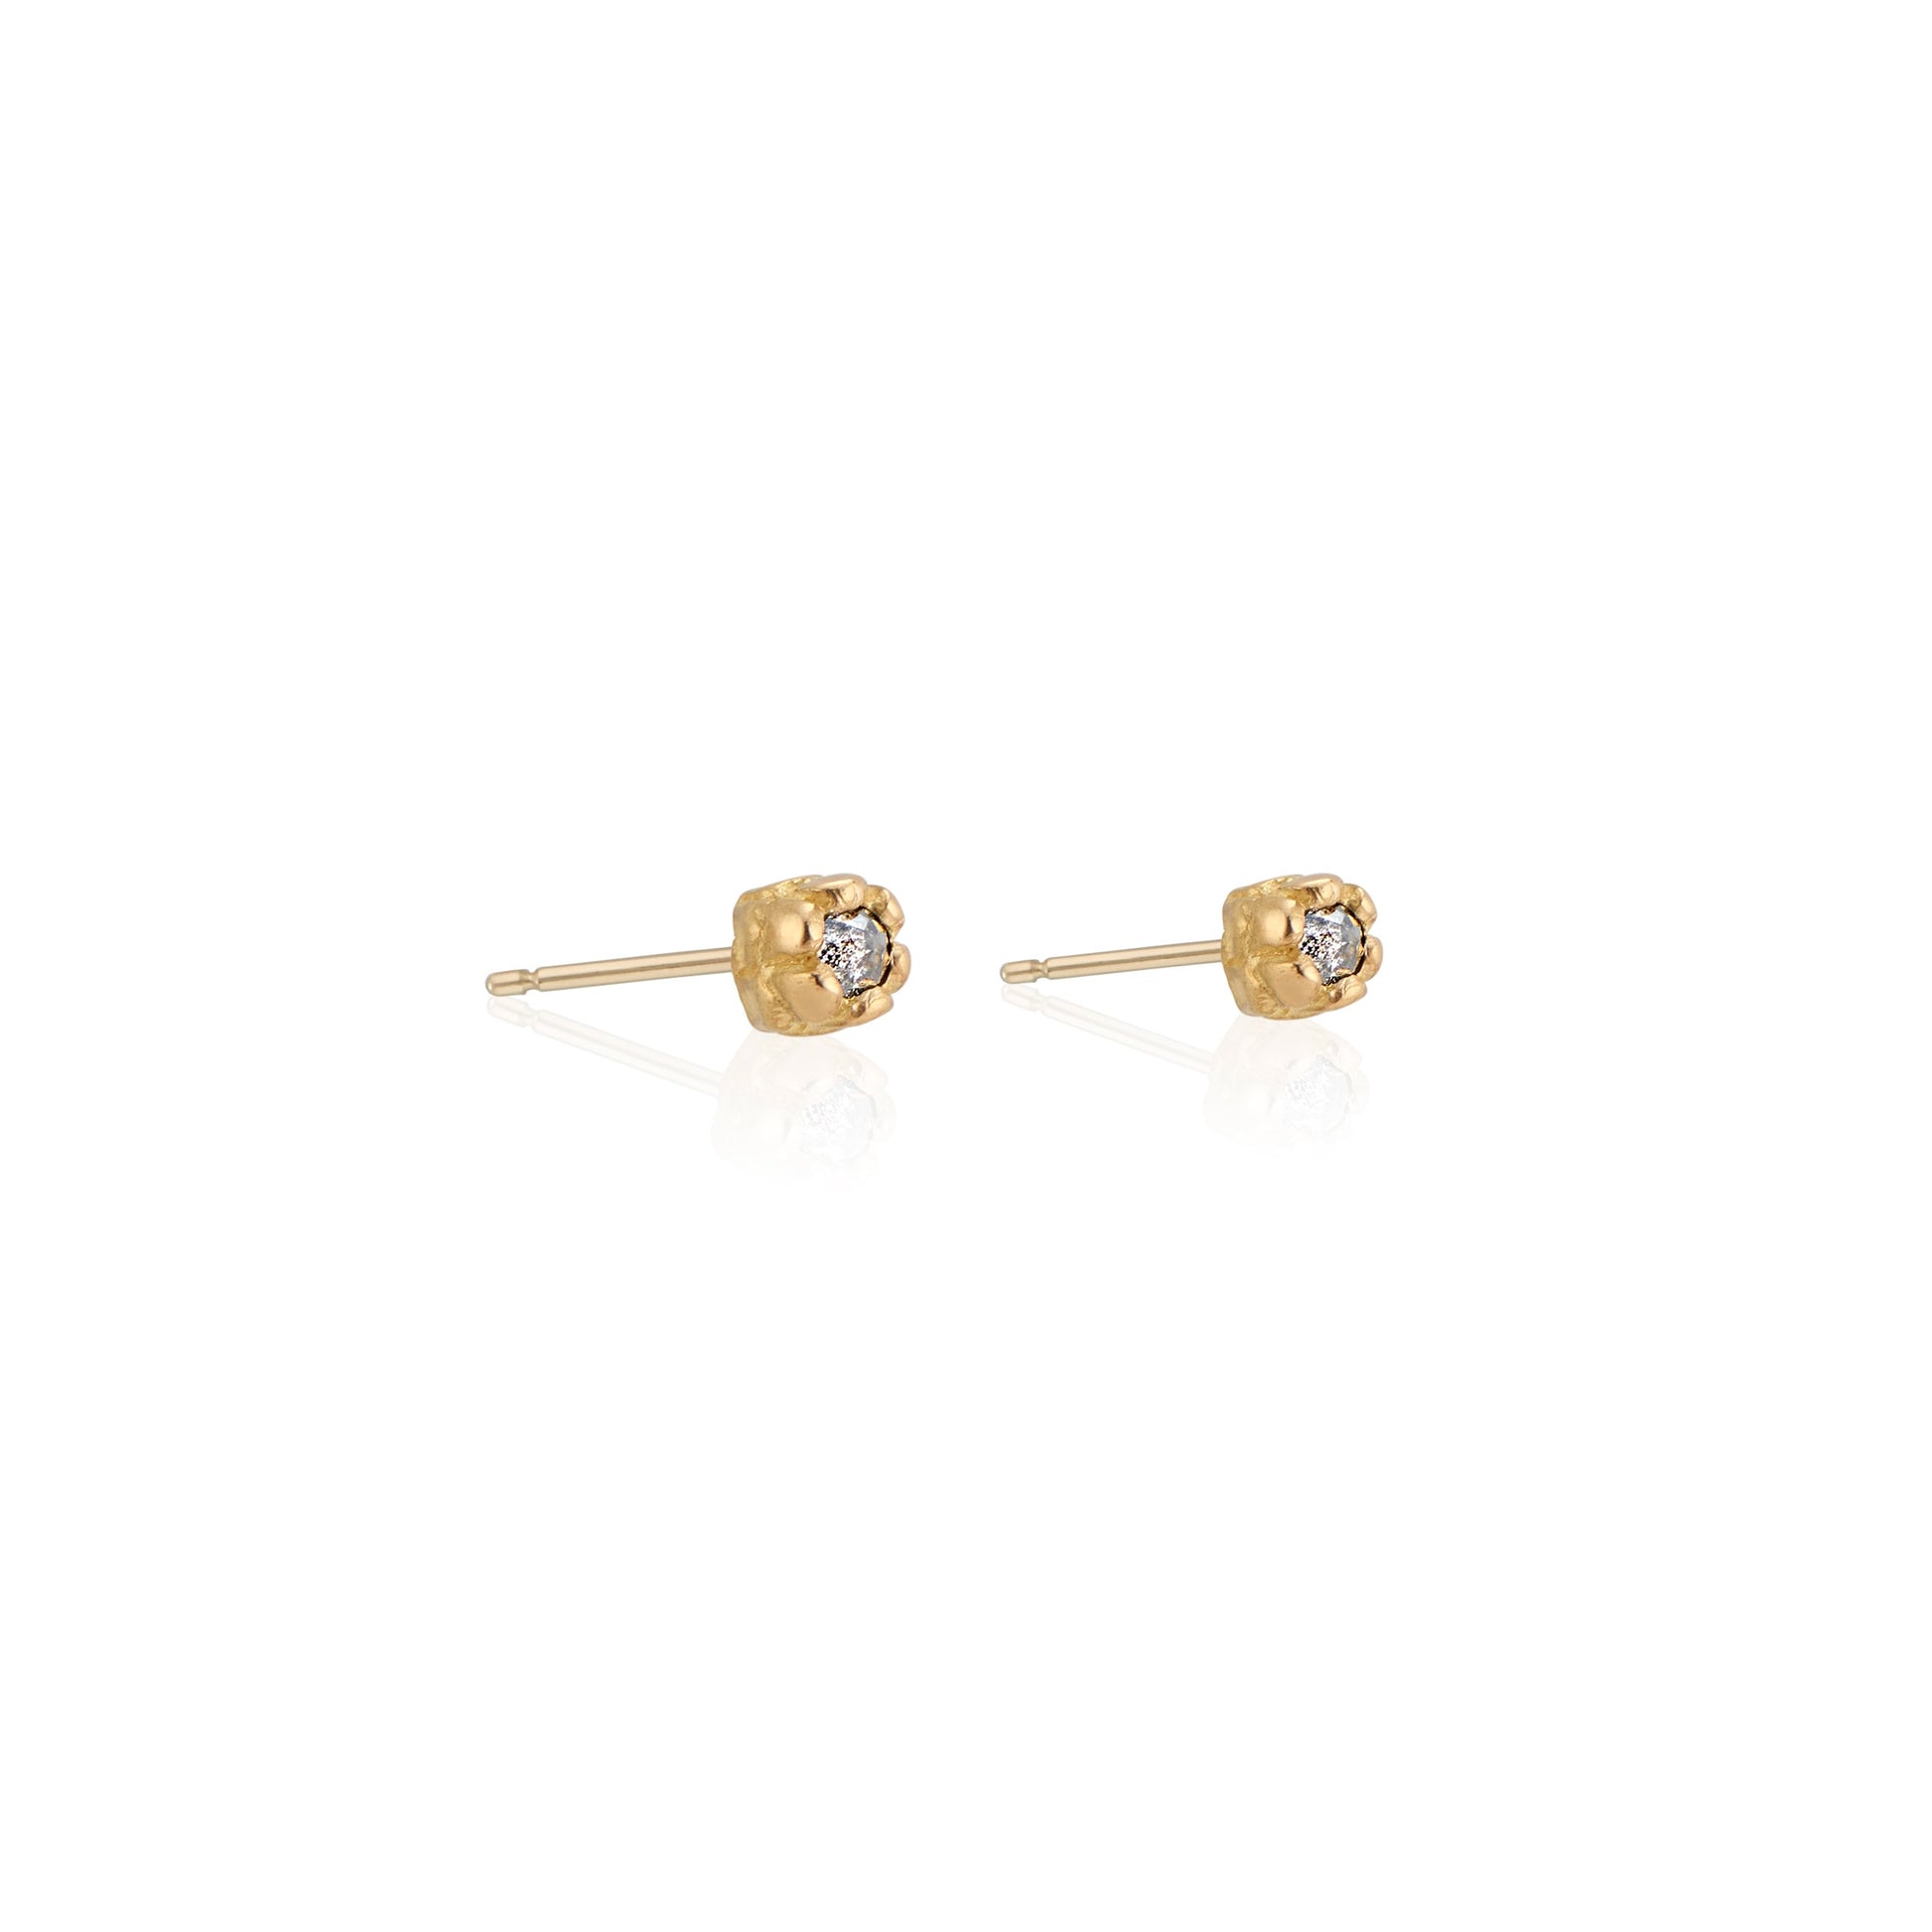 Inspired by a set of rings purchased for a childhood crush, the Bey earrings merge the simplicity of days past with a refined sophistication. Hand-crafted gold petals form a cocoon around a stunning rose cut diamond, creating delicate earrings perfect for celebrating the everyday. 